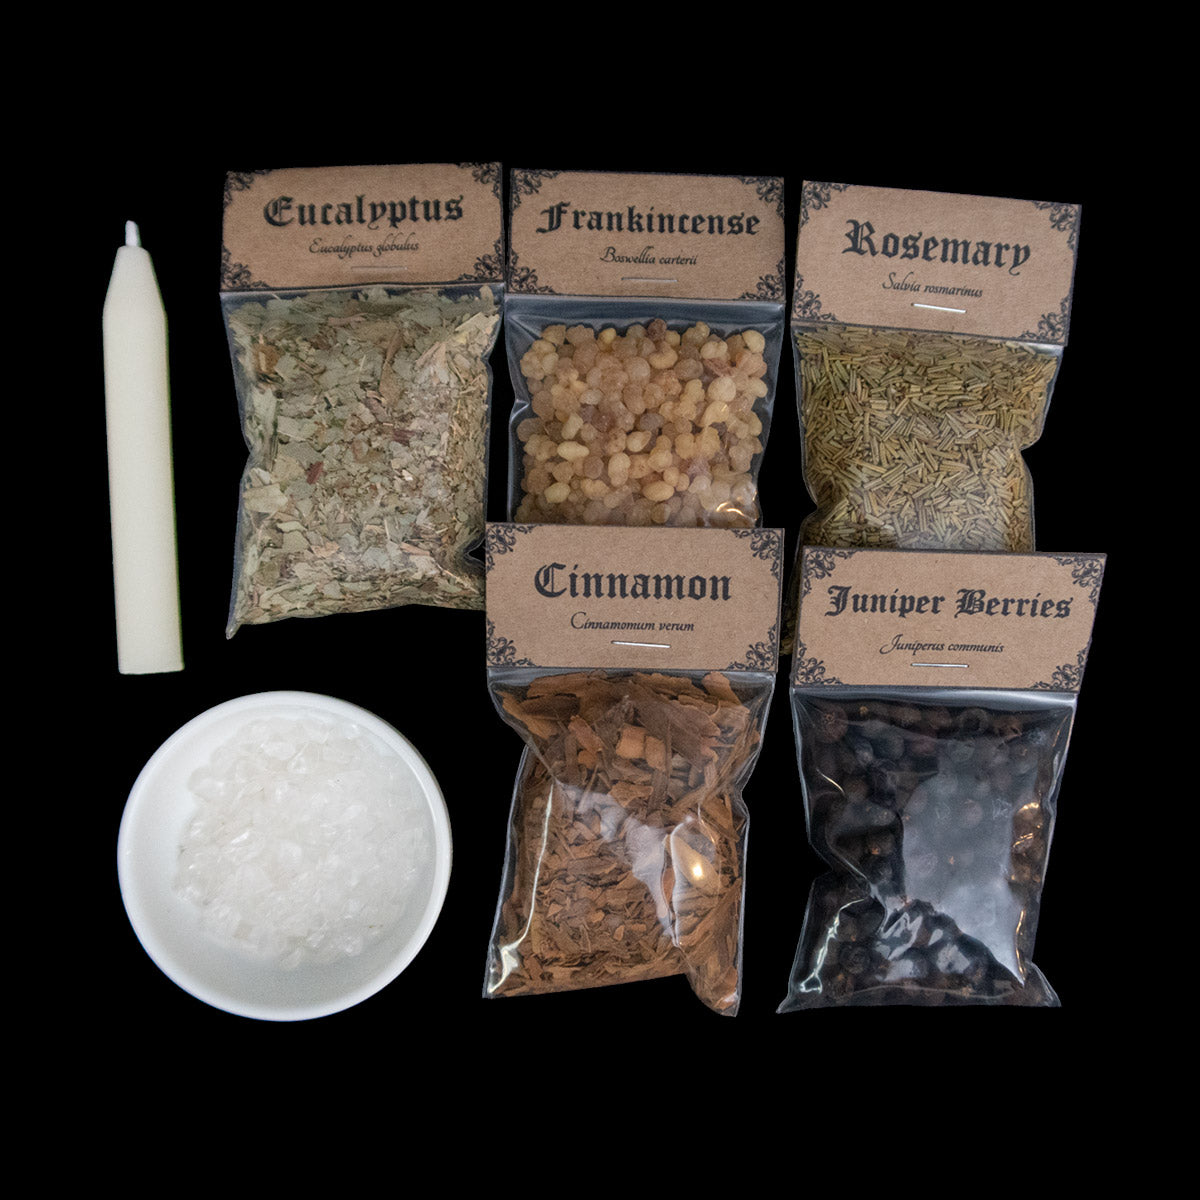 A pale chime candle, small bowl of clear quartz crystal chips, and 5 bags of herbs with Victorian-apothecary-style brown labels at the top give the common and Latin names